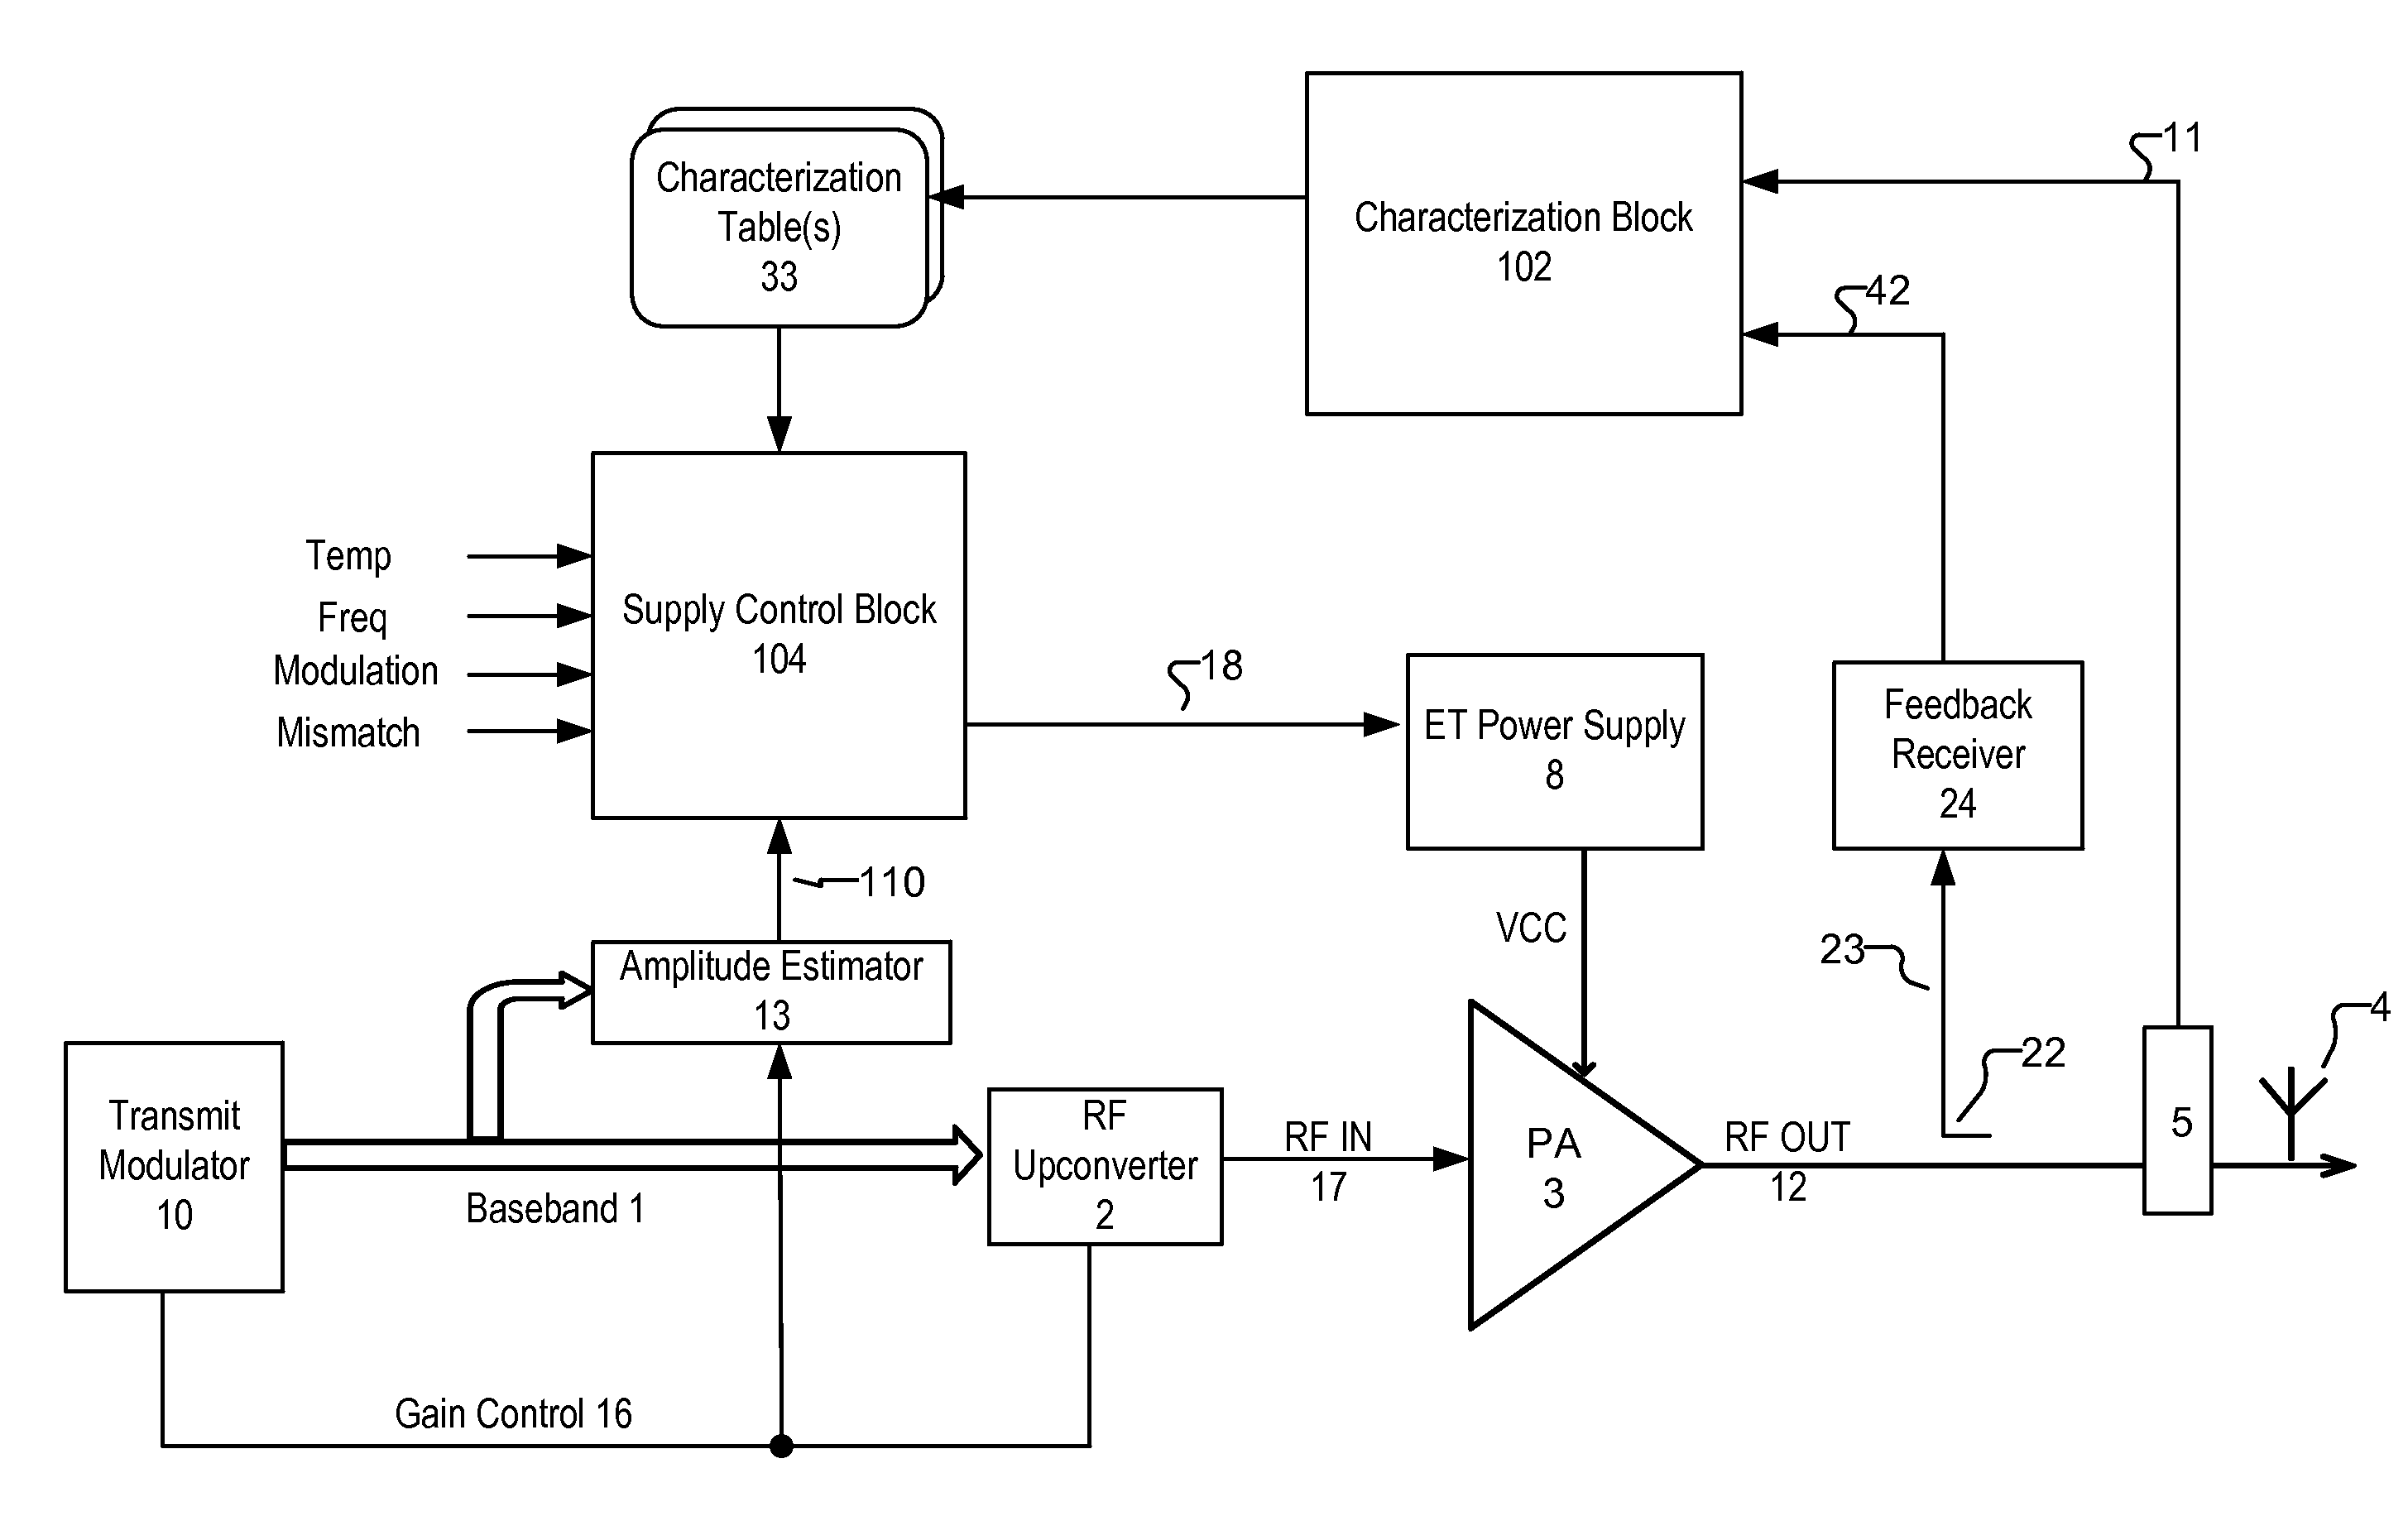 Envelope Tracking System with Internal Power Amplifier Characterization